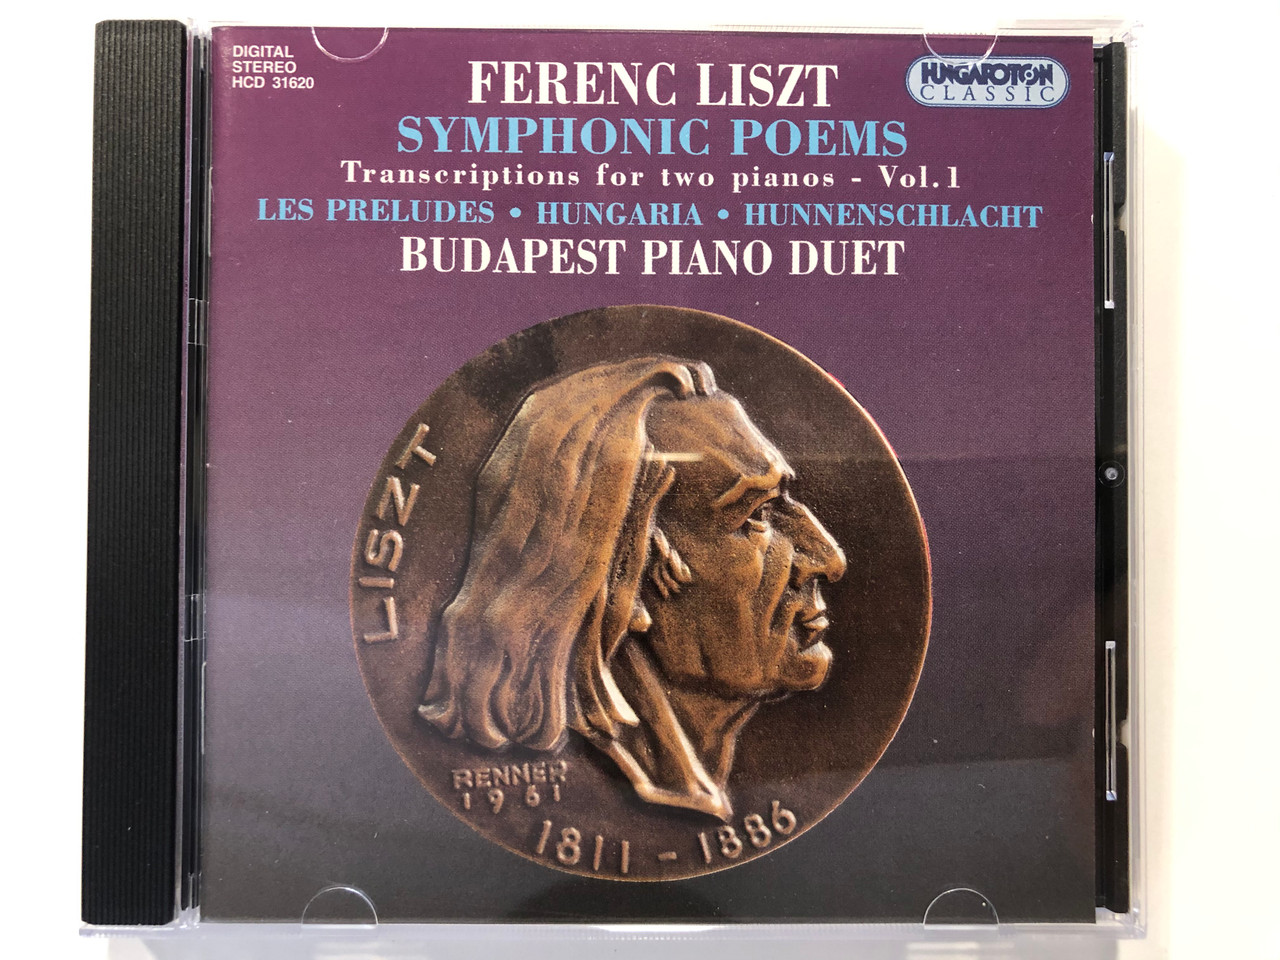 https://cdn10.bigcommerce.com/s-62bdpkt7pb/products/29620/images/176494/Ferenc_Liszt_-_Symphonic_Poems_Transcriptions_for_two_pianos_-_Vol_1._Les_Preludes_Hungaria_Hunnenschlacht_Budapest_Piano_Duet_Hungaroton_Classic_Audio_CD_1996_Stereo_HCD_31620_1__59575.1619464277.1280.1280.JPG?c=2&_ga=2.228201309.1957793144.1619537774-1037218475.1619537774